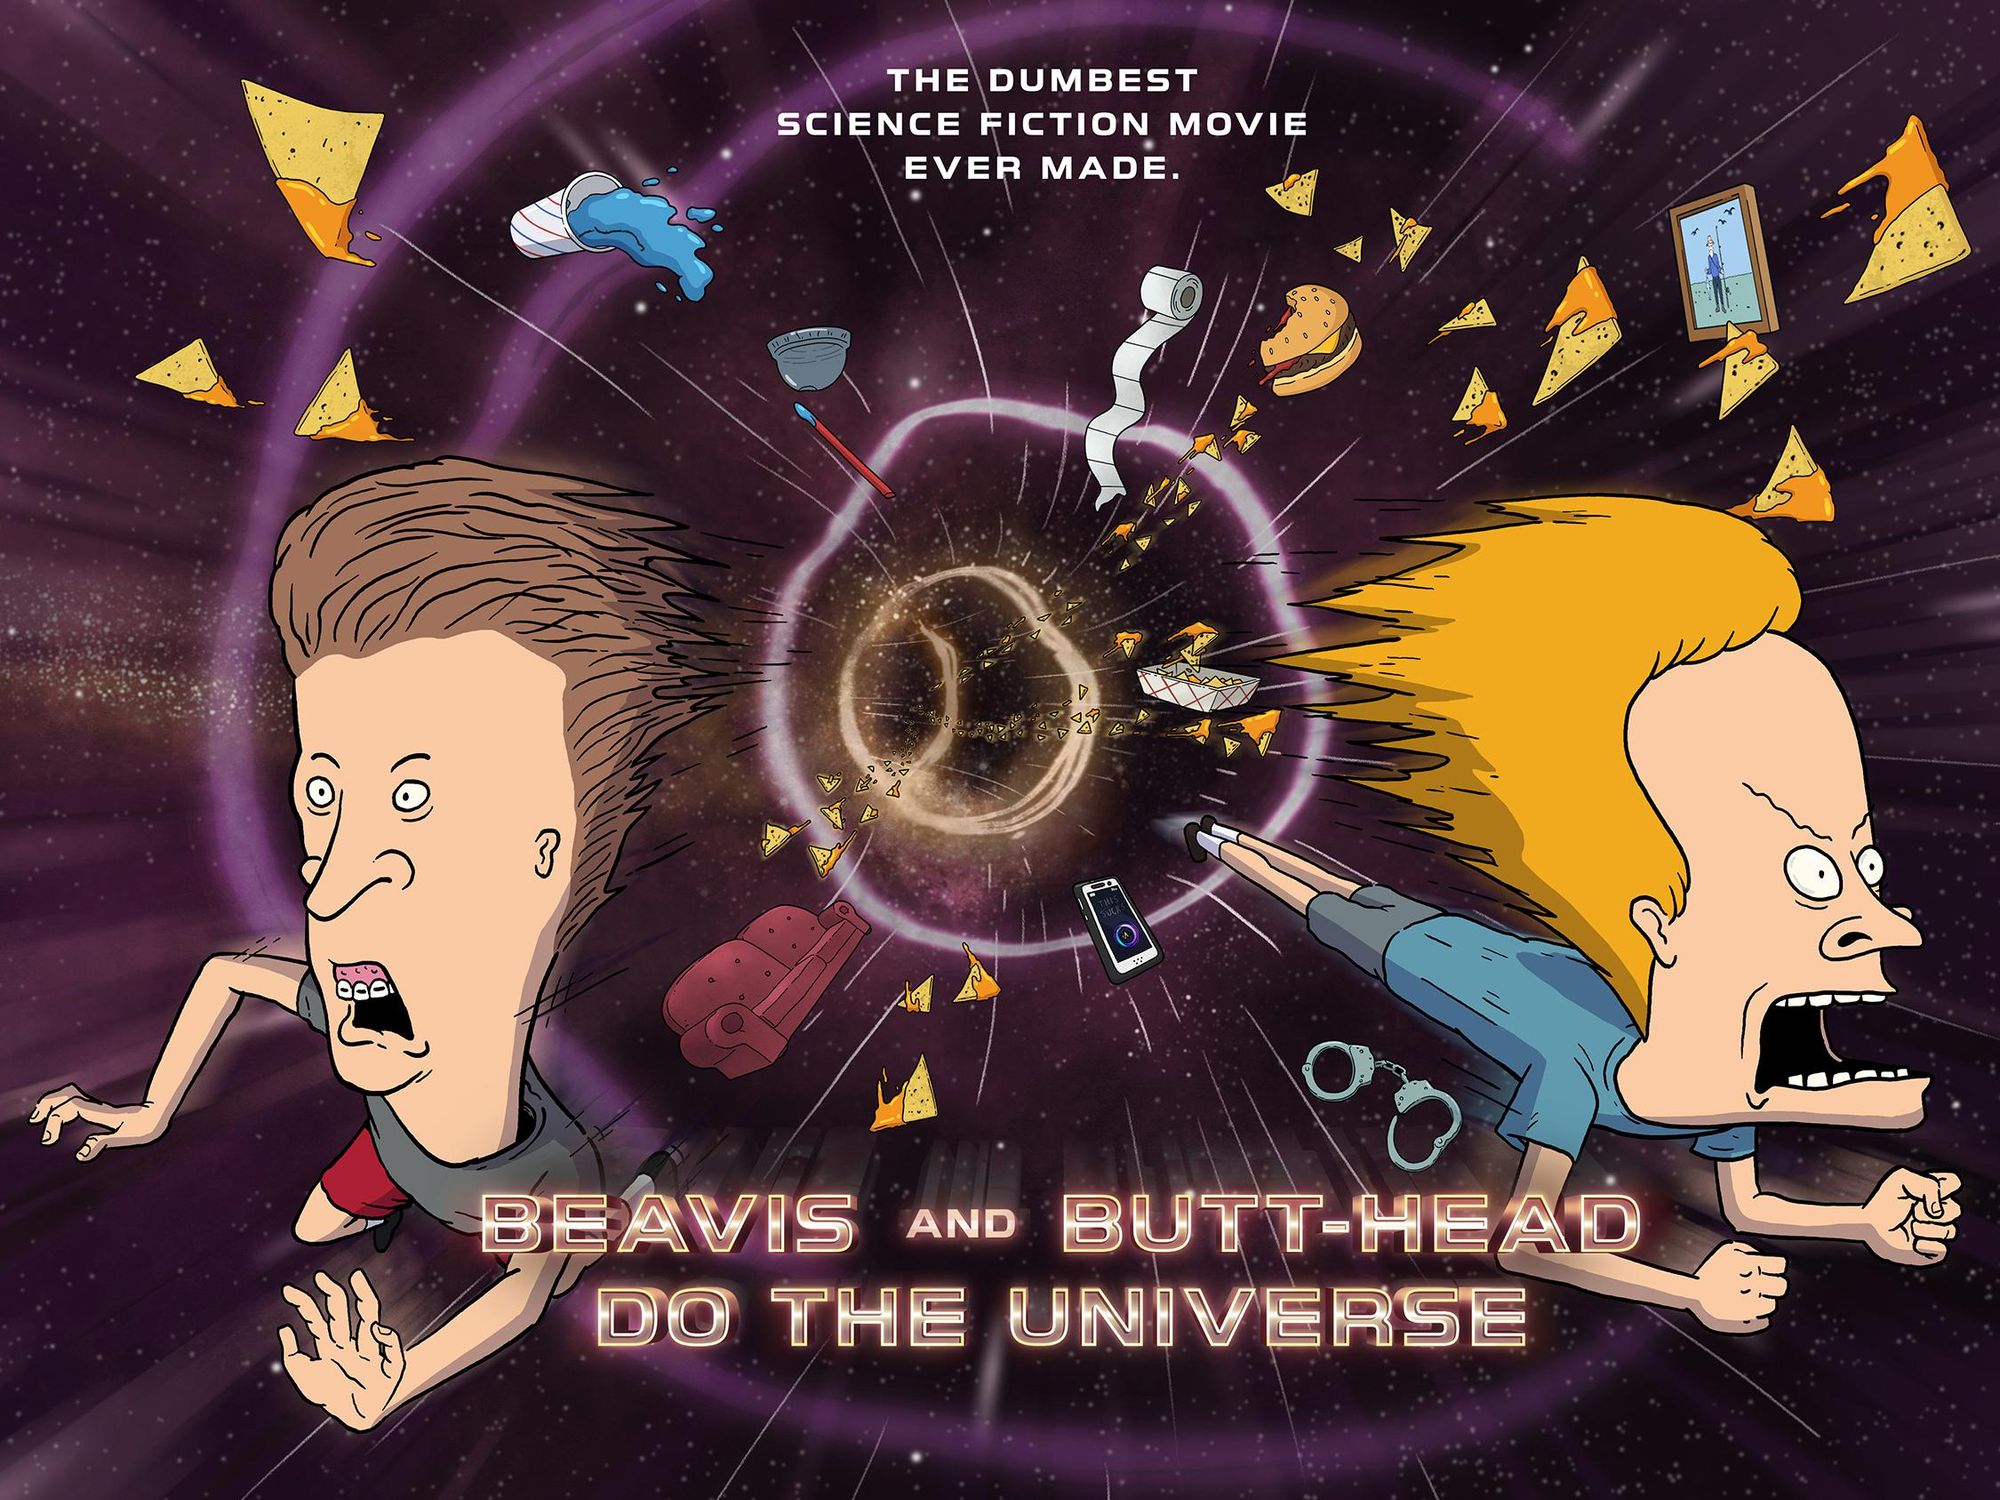 A promotional poster of the new ​BEAVIS AND BUTT-HEAD DO THE UNIVERSE movie with Beavis and Butt-Head being sucked into a black hole